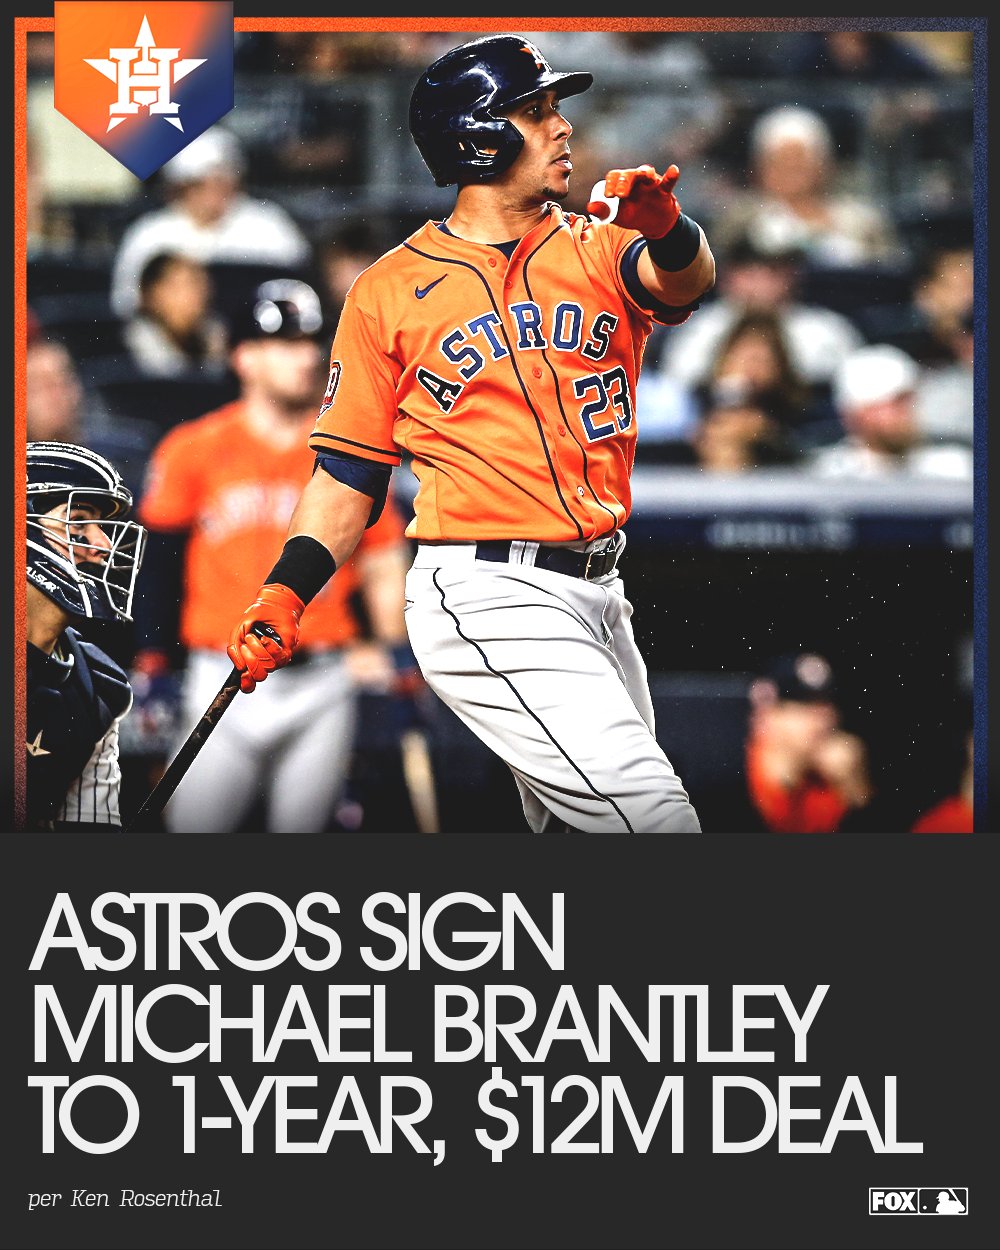 FOX Sports: MLB on X: The Astros re-sign Michael Brantley to a 1